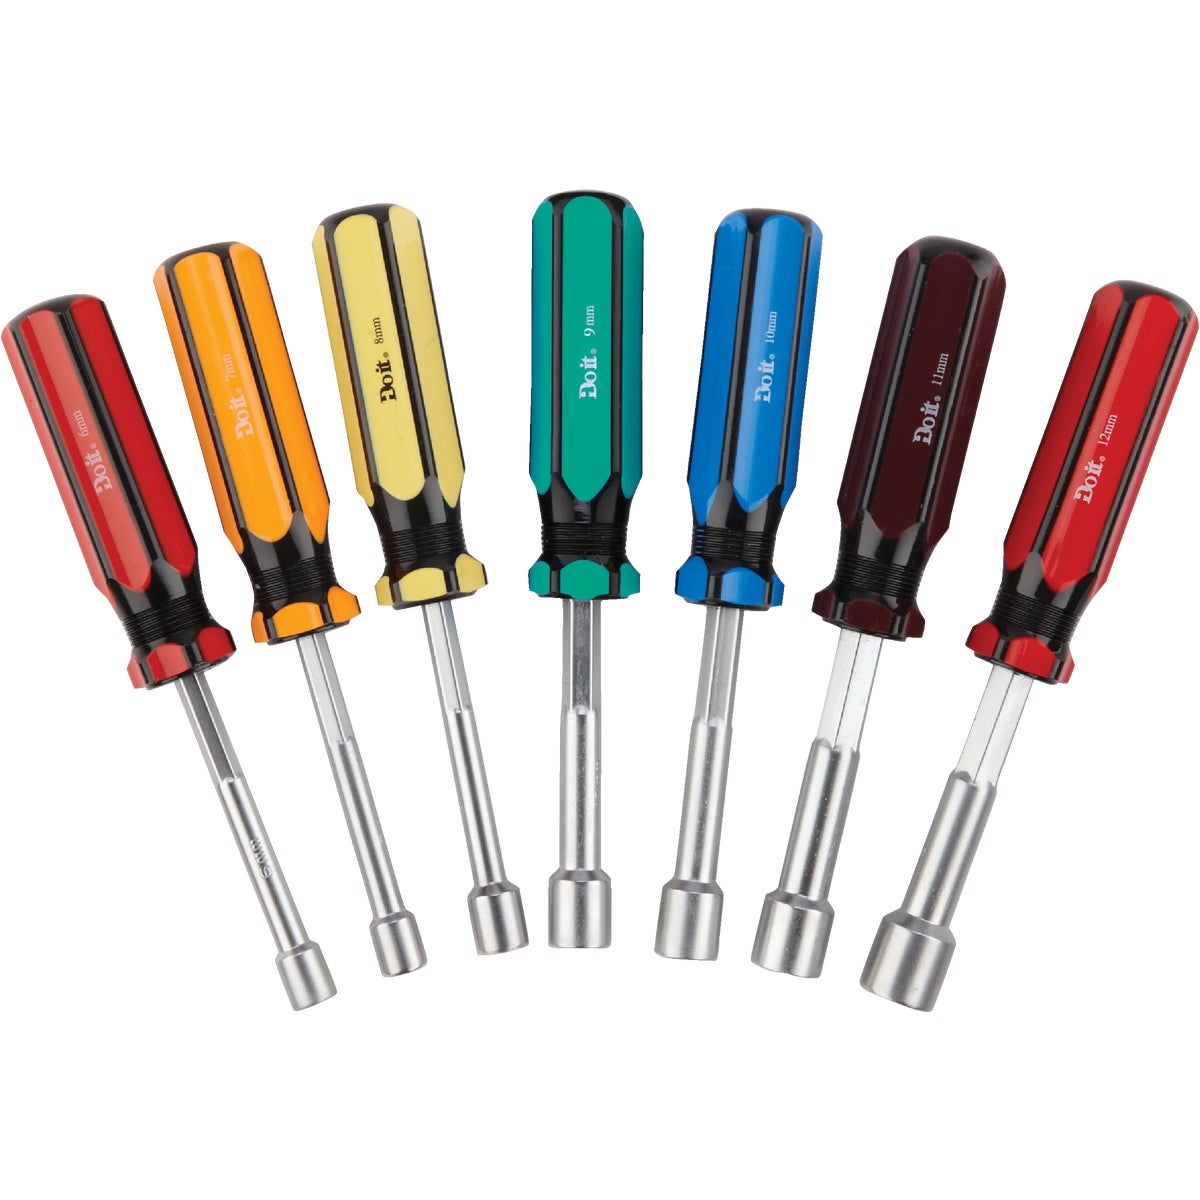 Do it Metric 3 In. Solid Shaft Nut Driver Set, 7-Piece